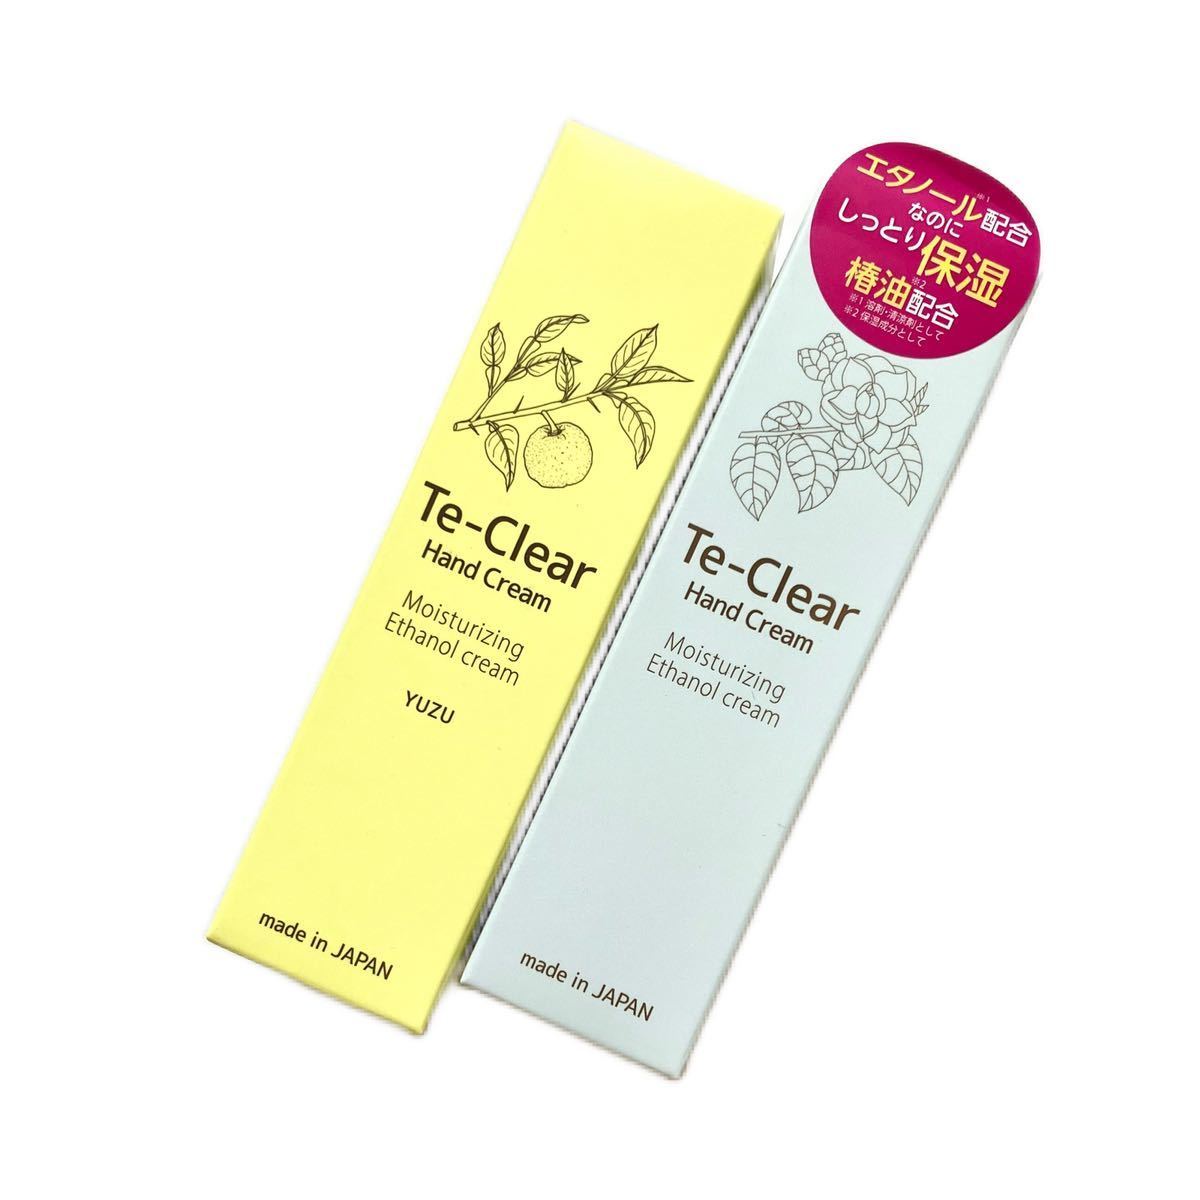  new goods * Te-Clear hand cream * camellia oil combination * made in Japan * floral * yuzu * 2 kind * 2 pcs set * free shipping 